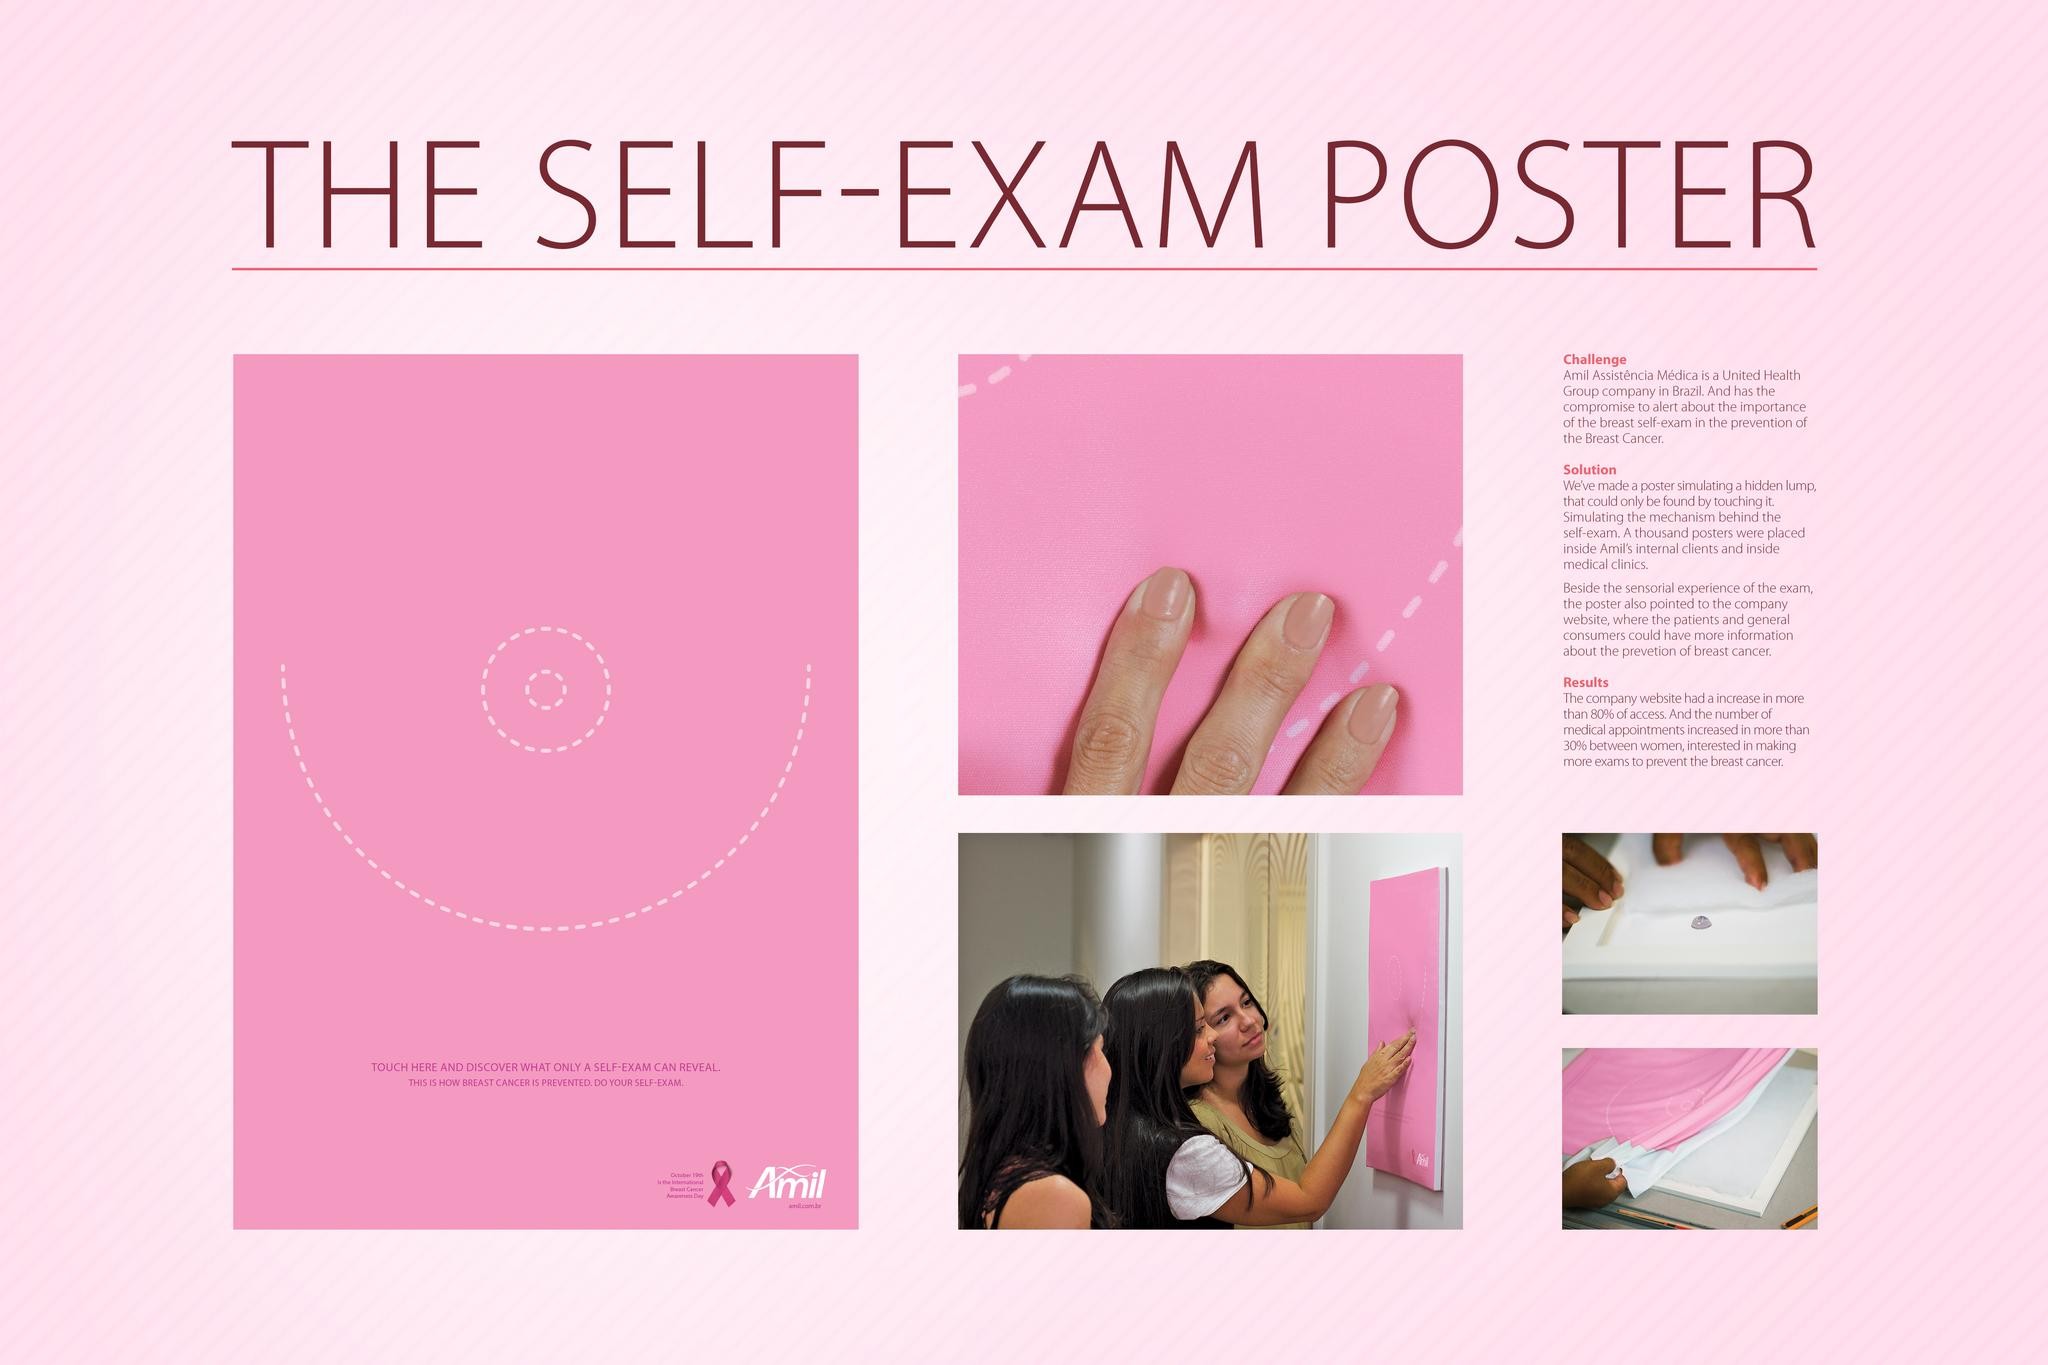 THE SELF-EXAM POSTER